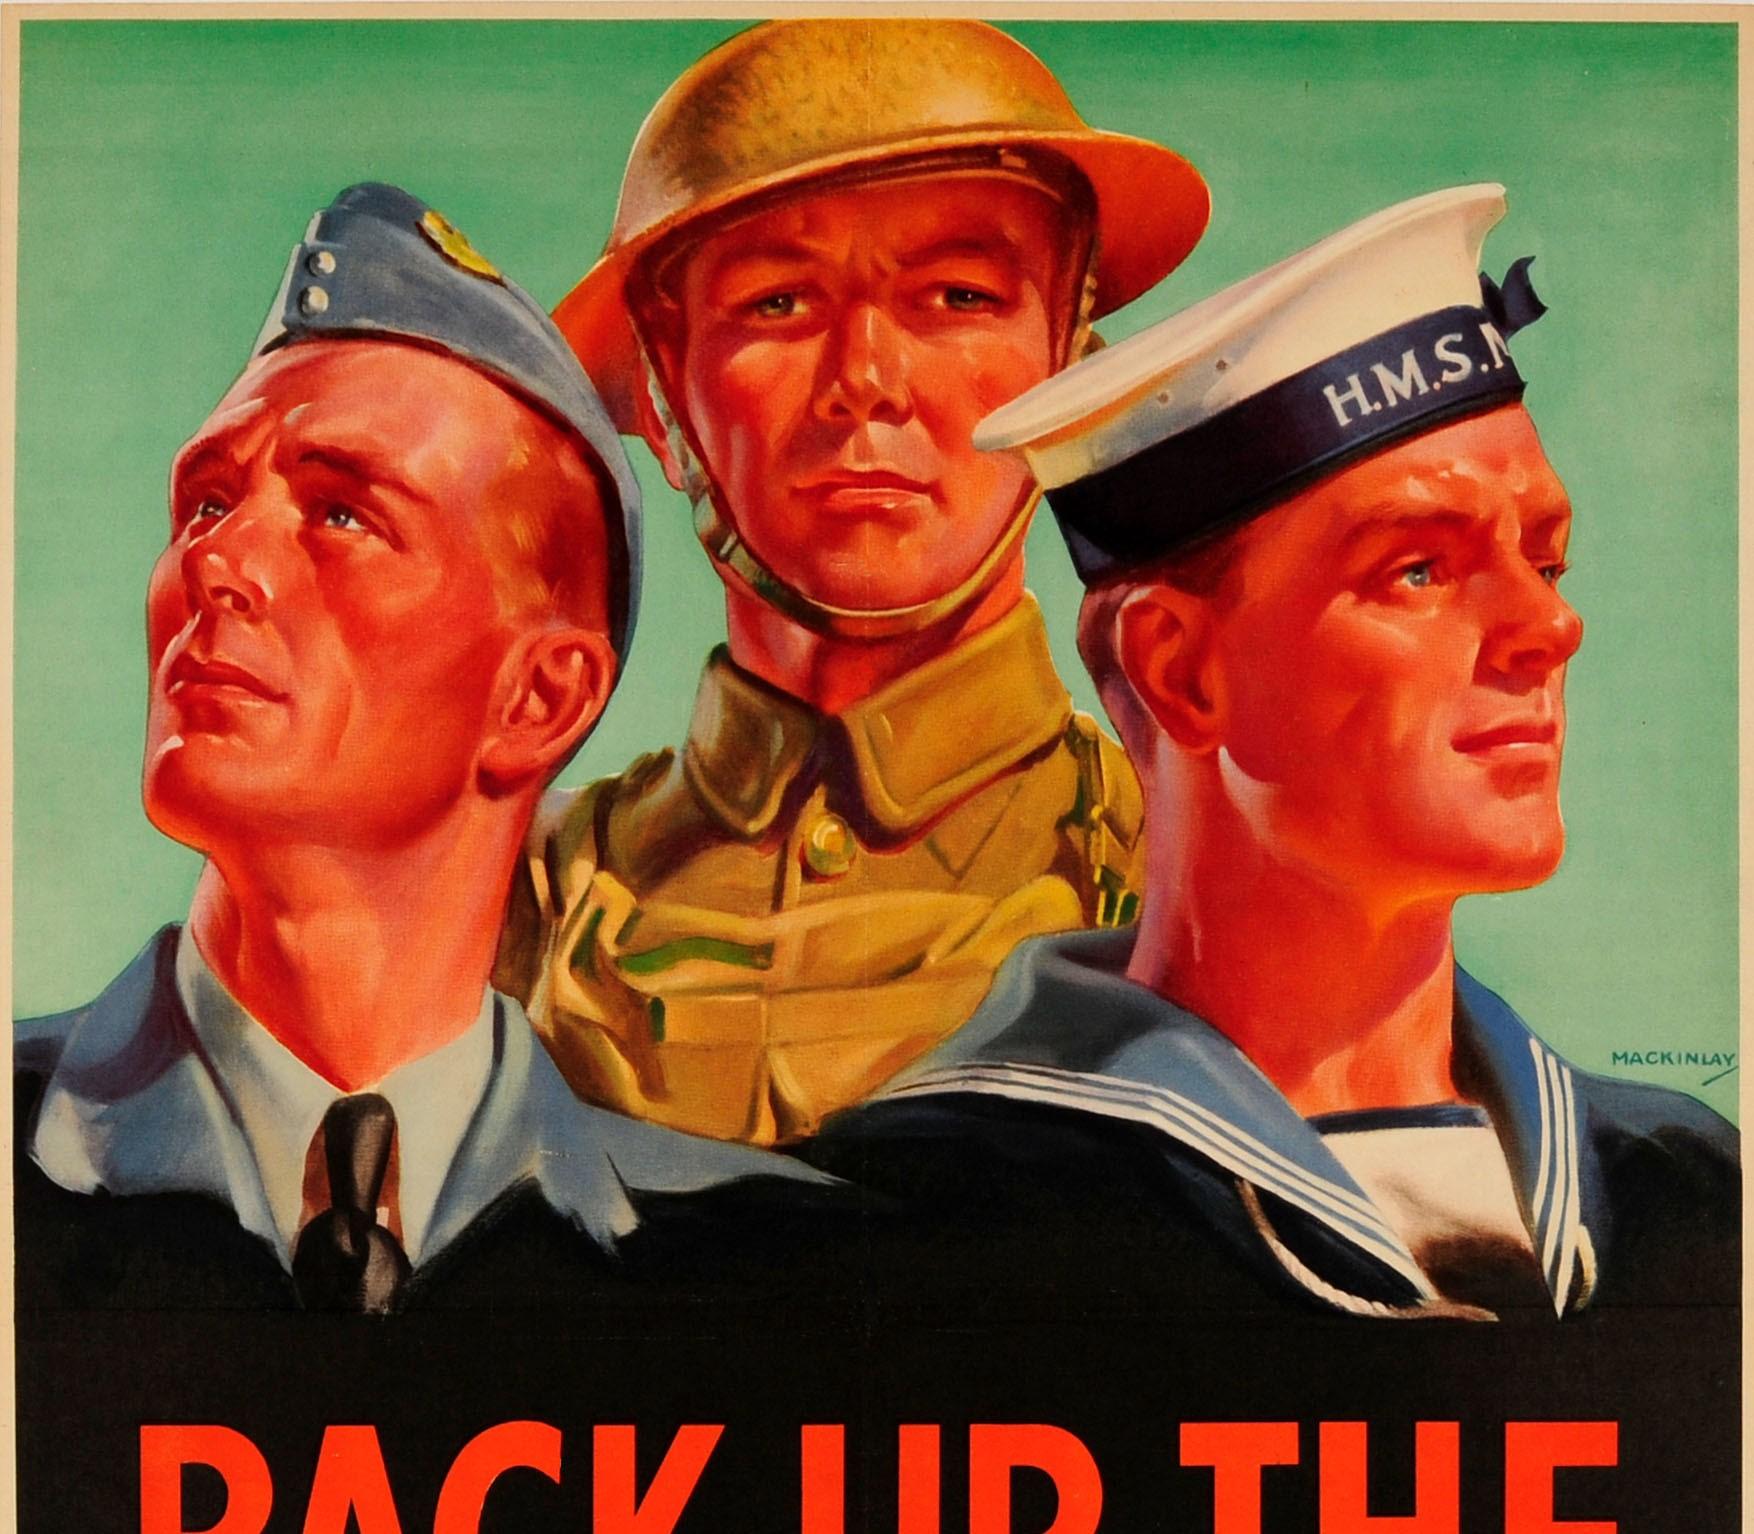 Original Vintage WWII Poster Back Up The Fighting Forces British Army RAF Navy - Print by Mackinlay